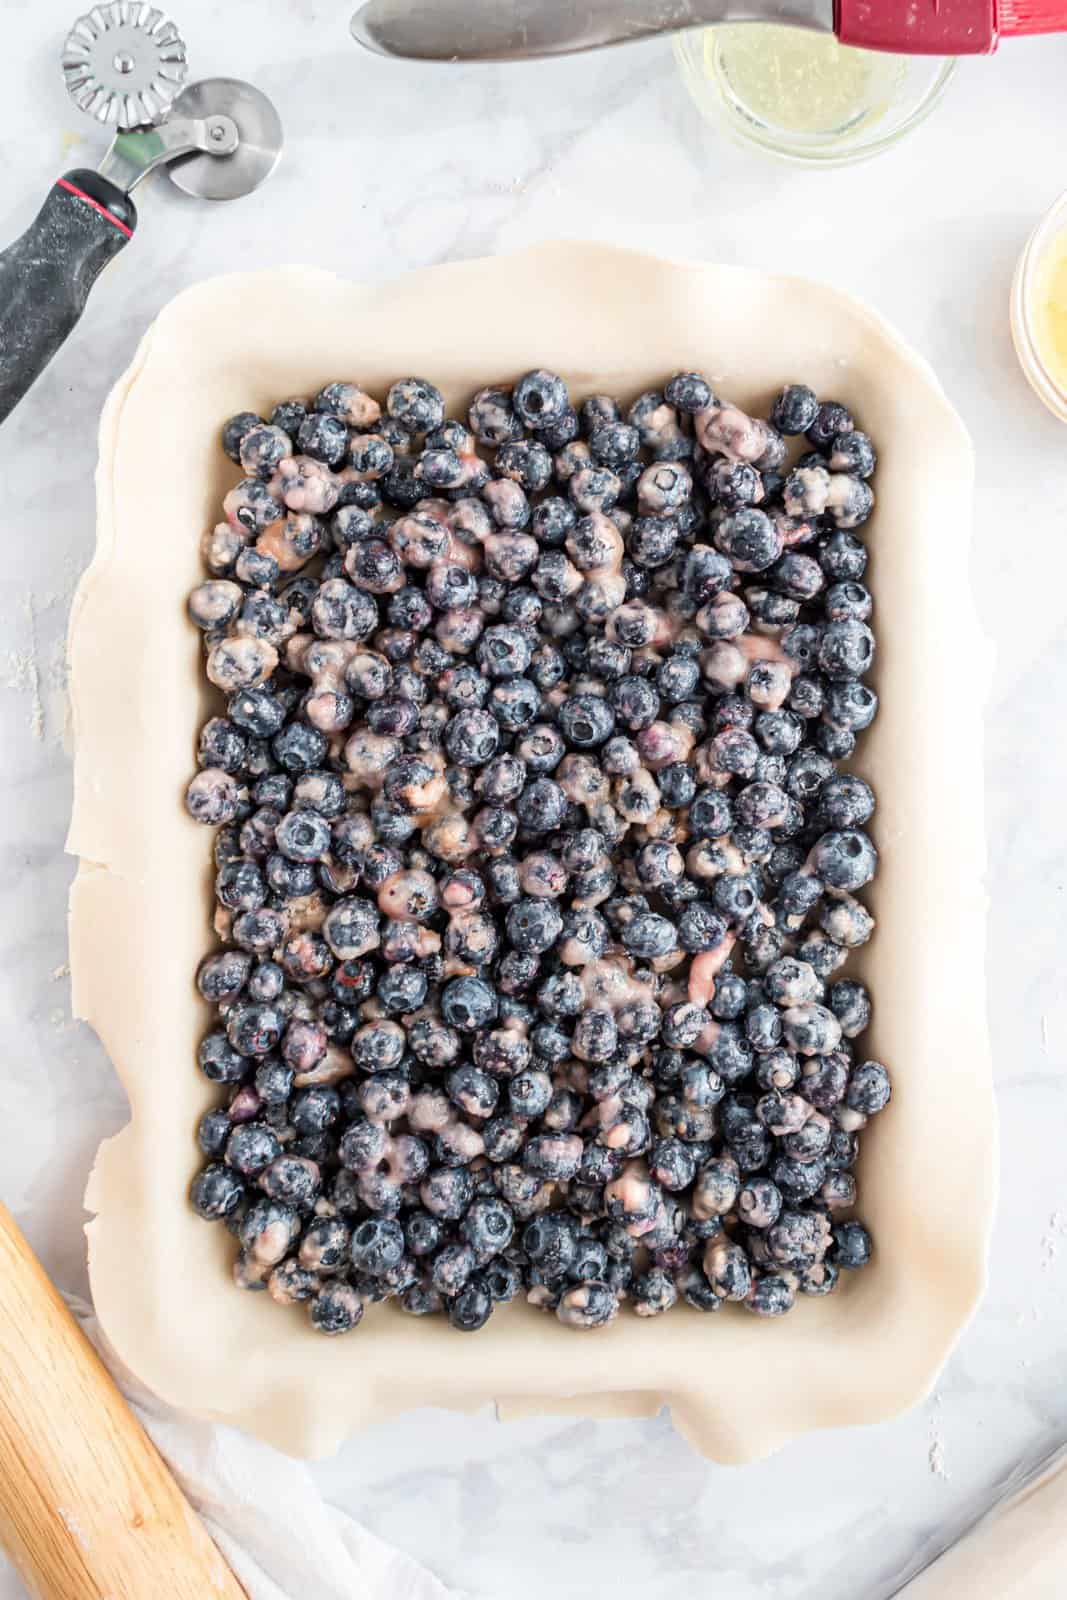 Blueberry pie filling on a sheet of dough.